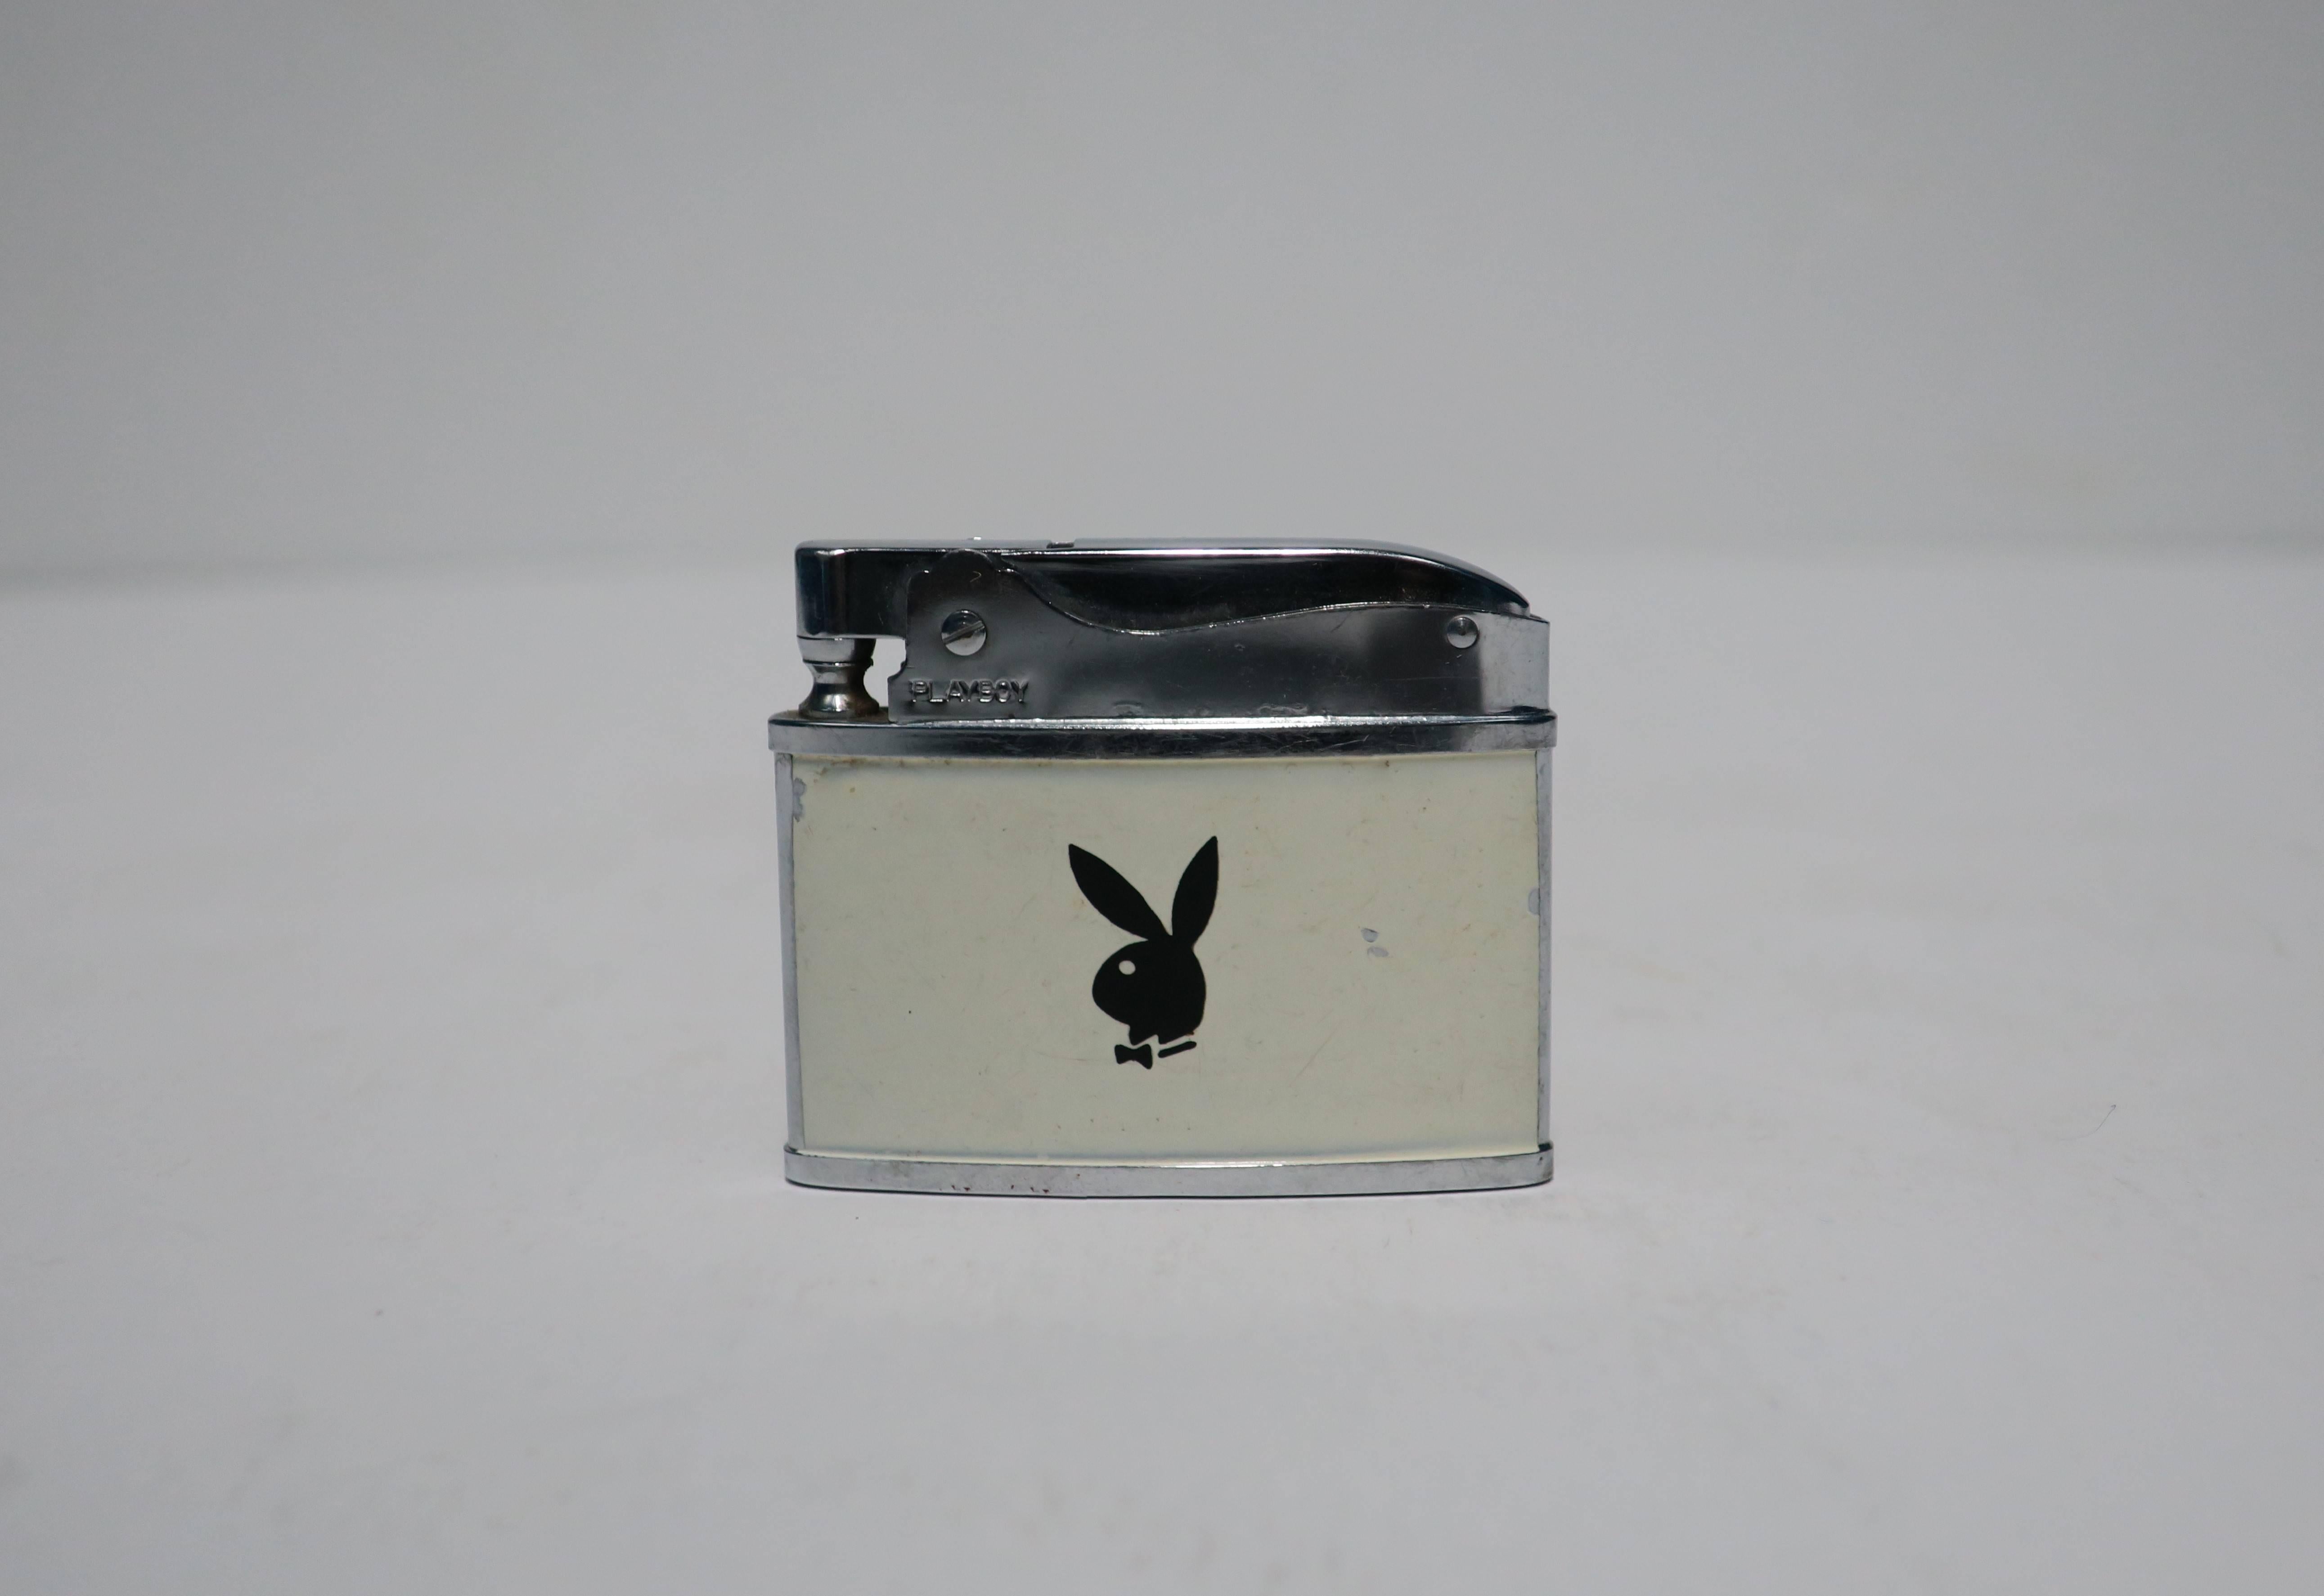 A vintage chrome lighter with black Playboy bunny on white background, circa 1970s. In working order. With maker's mark, "Playboy," on front chrome area and underneath, both shown in images.